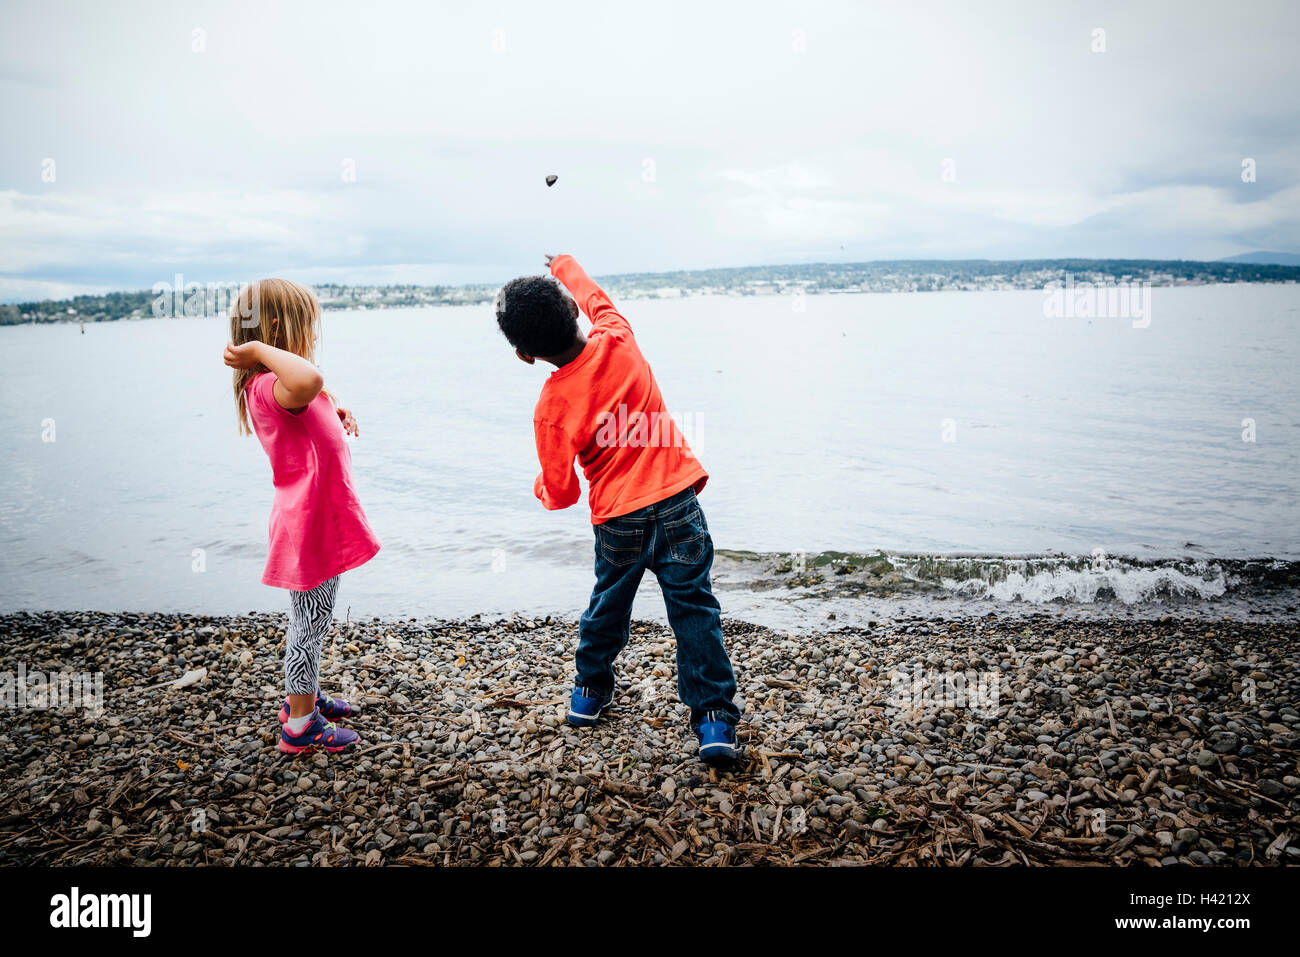 Boy and girl throwing rocks into river Stock Photo